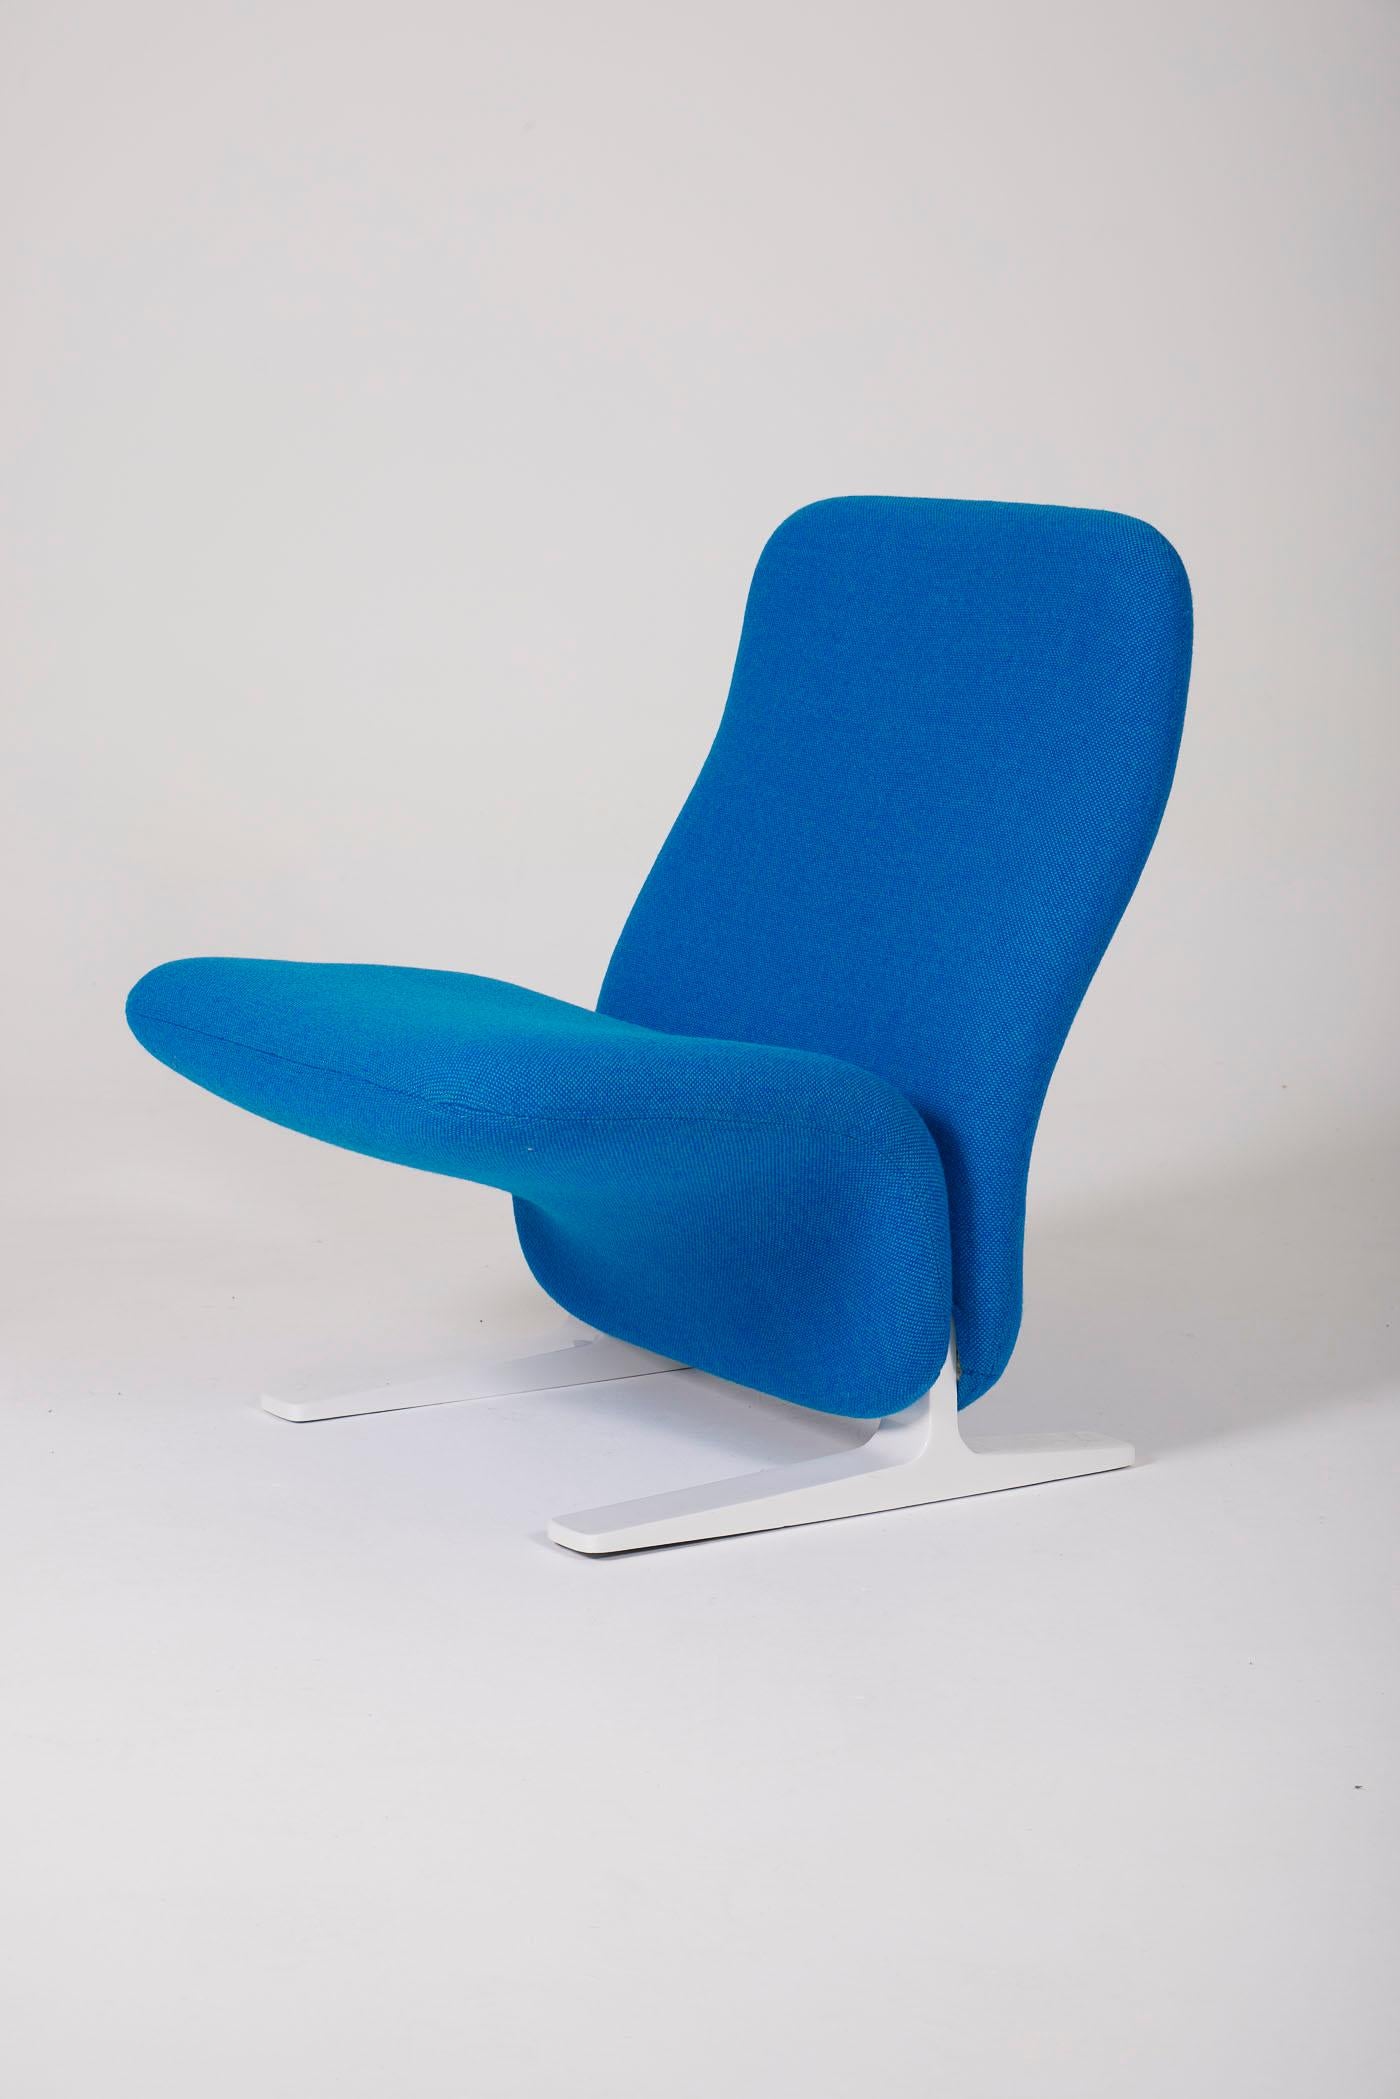 Pierre Paulin F780 armchair In Good Condition For Sale In PARIS, FR